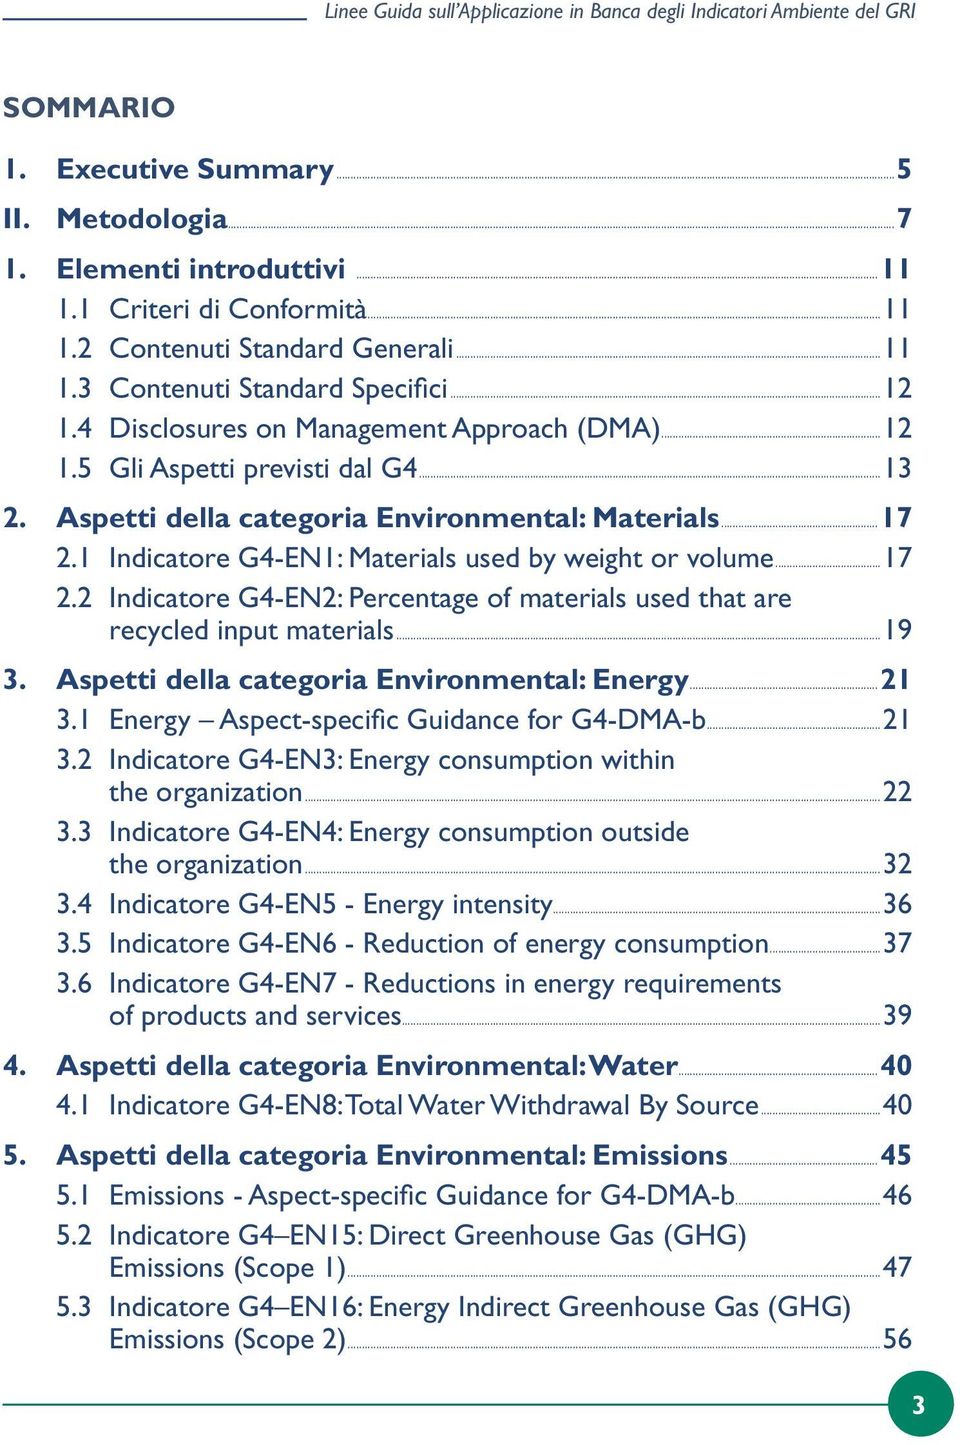 1 Indicatore G4-EN1: Materials used by weight or volume...17 2.2 Indicatore G4-EN2: Percentage of materials used that are recycled input materials...19 3.